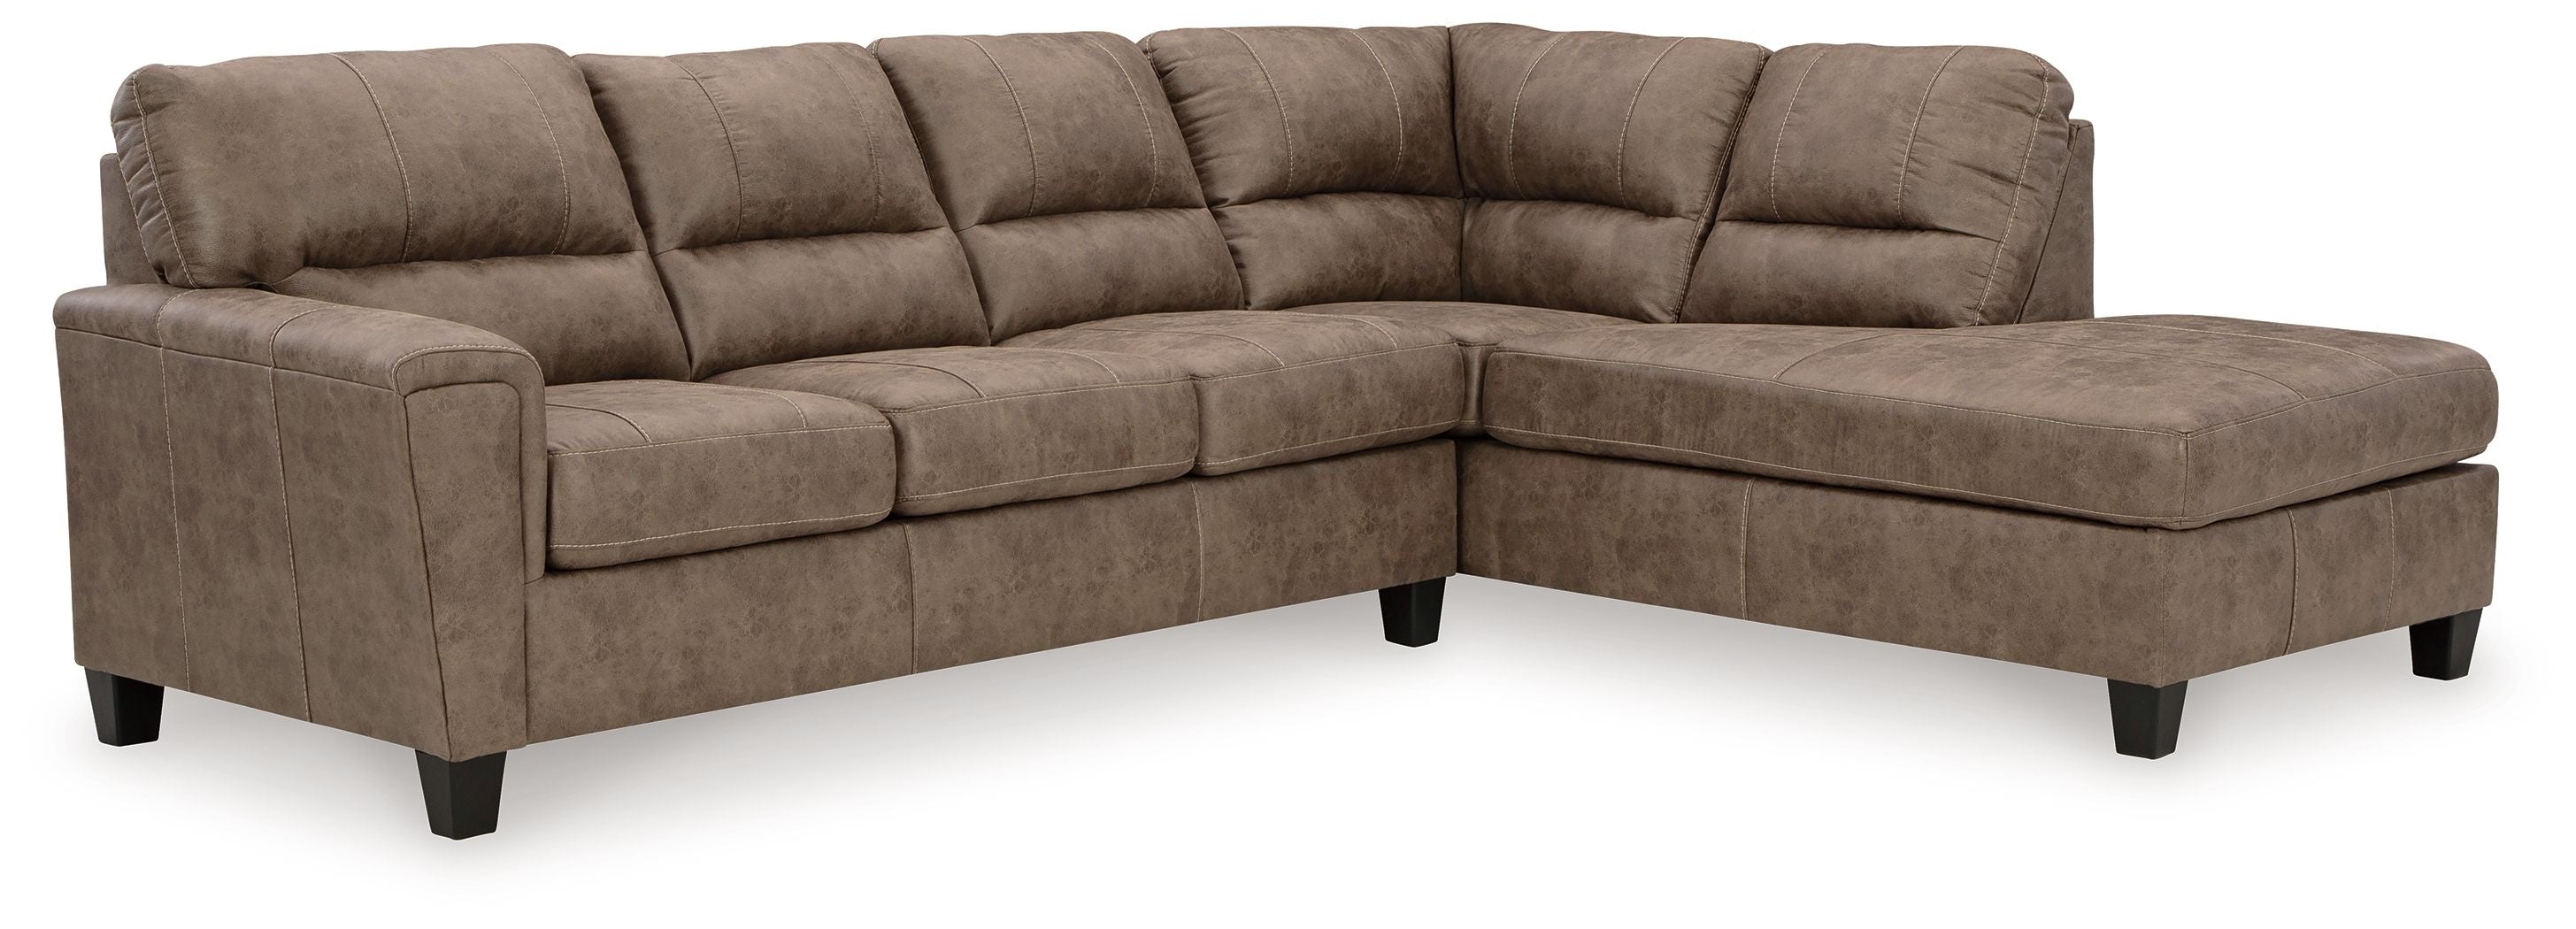 Navi Brown Sleeper Sectional w/ Chaise-Sleeper Sectionals-American Furniture Outlet